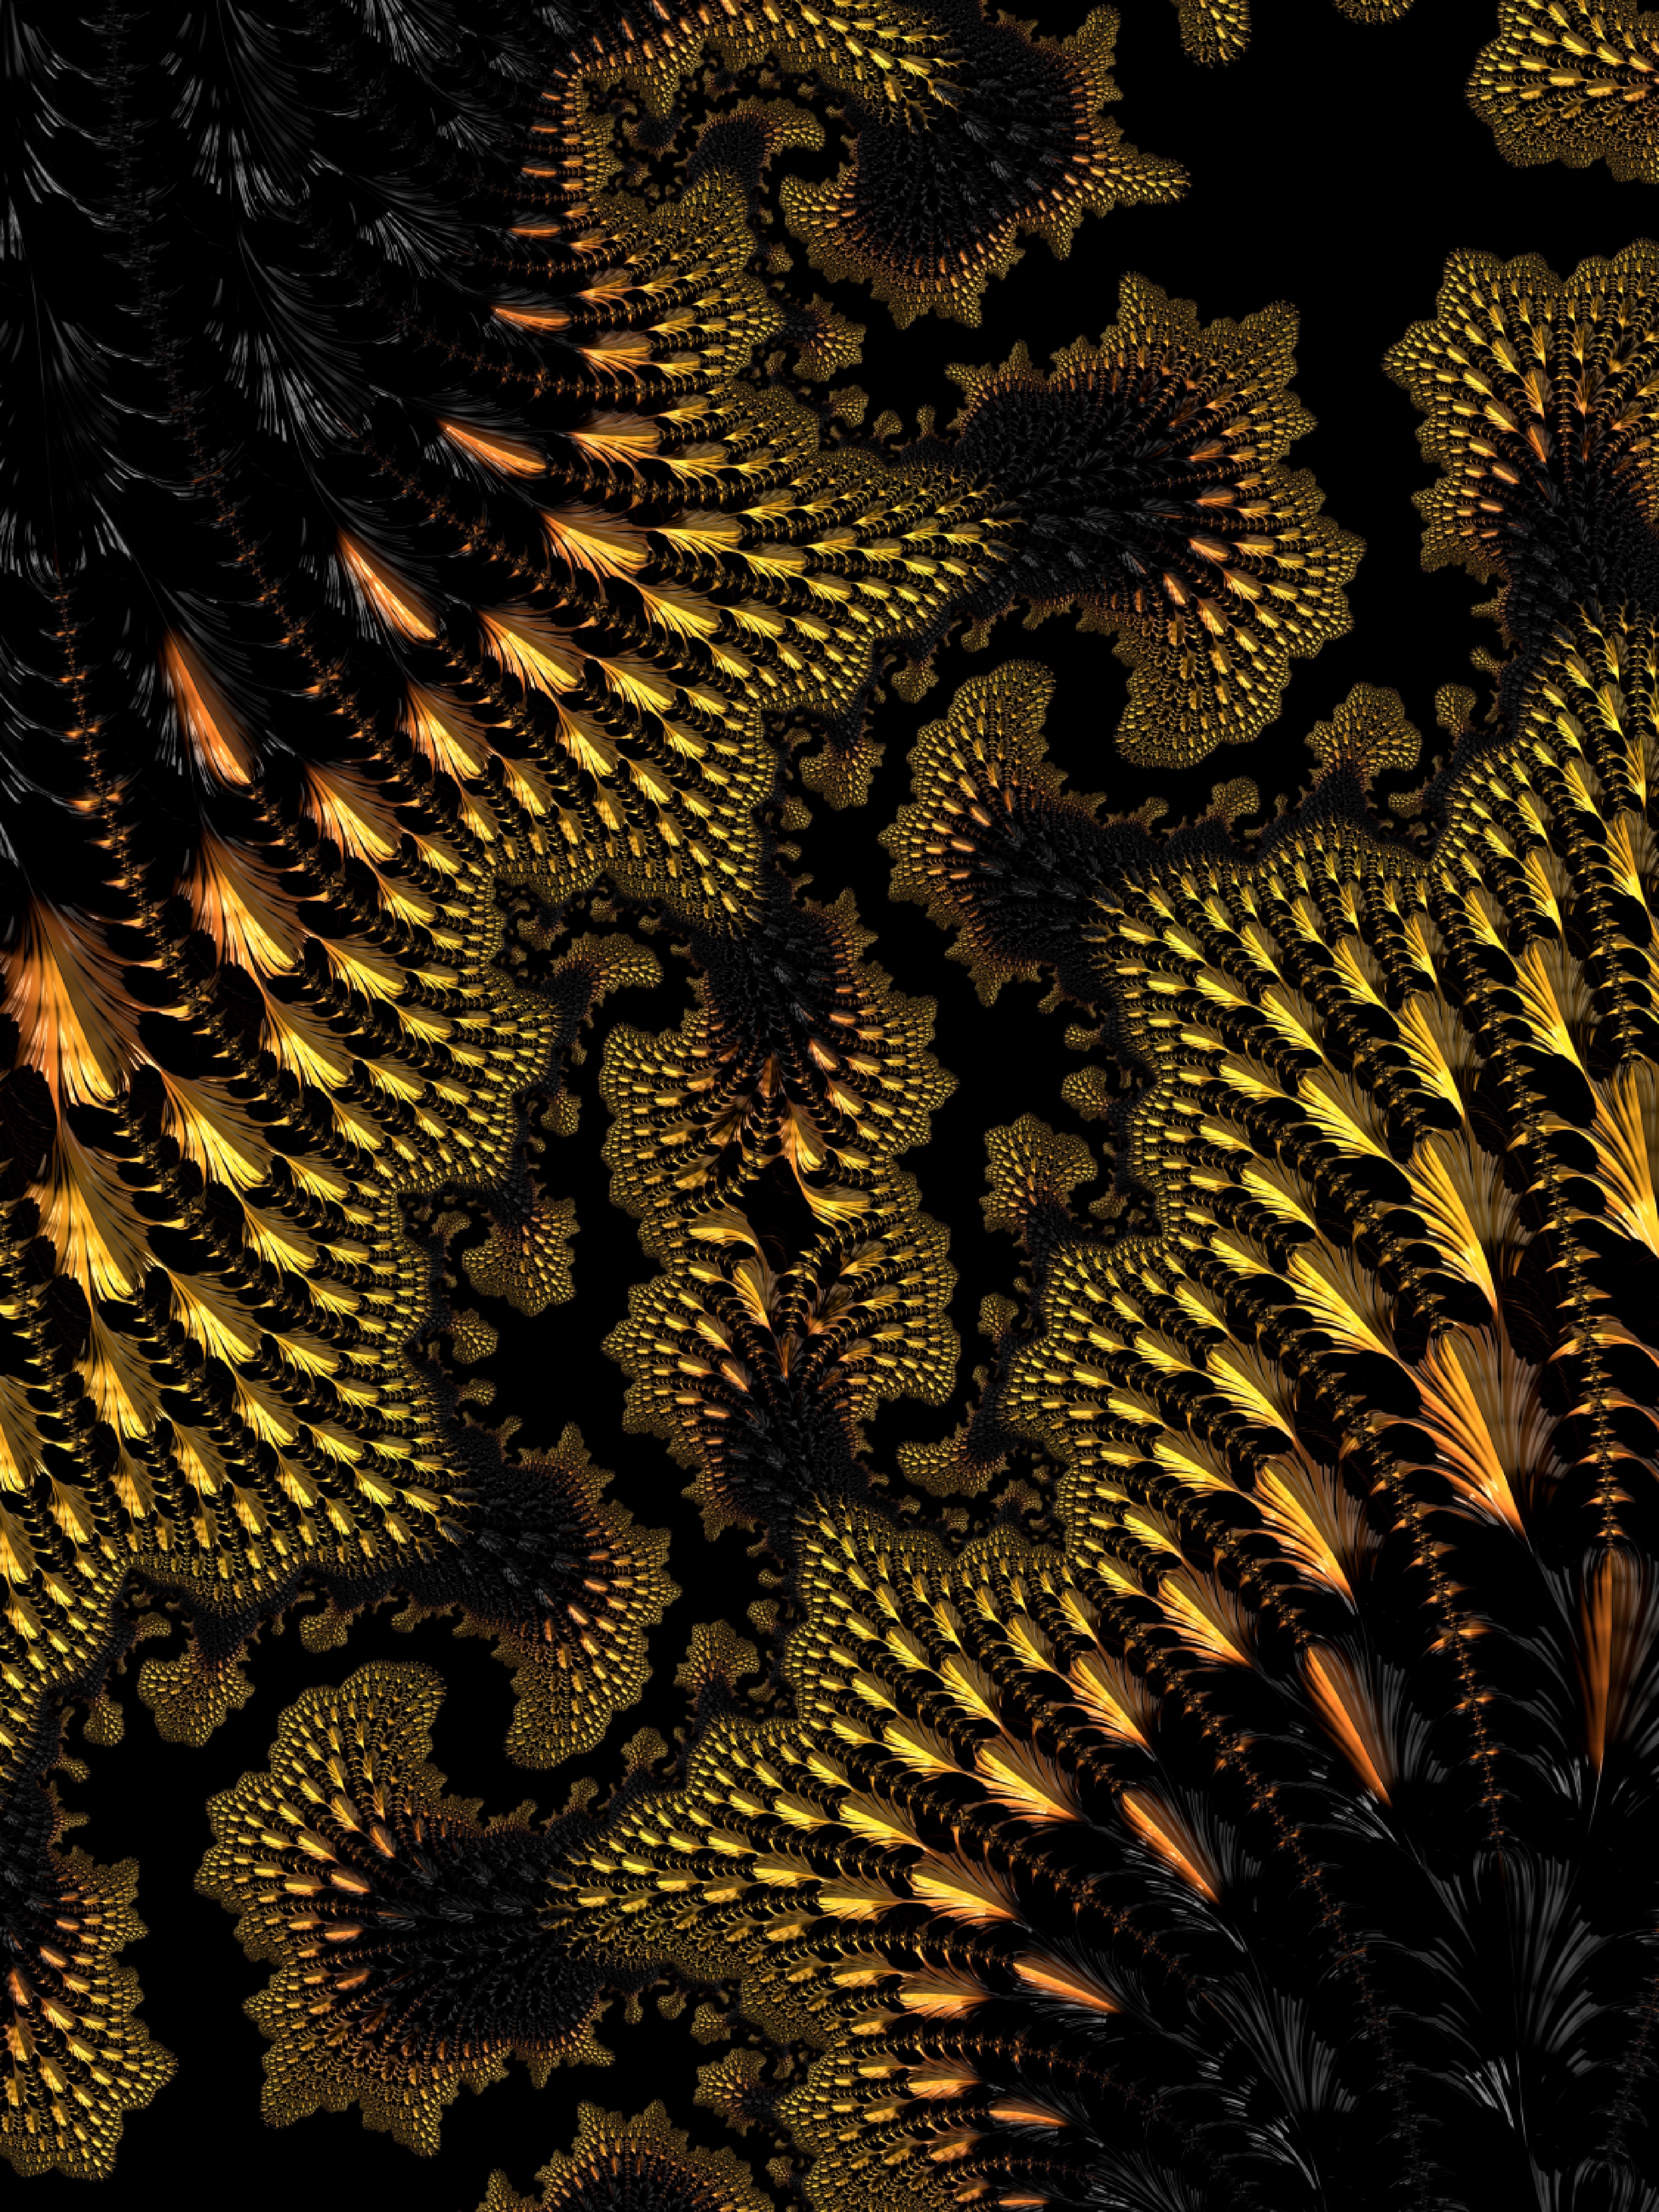 fractal, ornate, 3d, abstract, black, yellow, winding, sinuous 5K